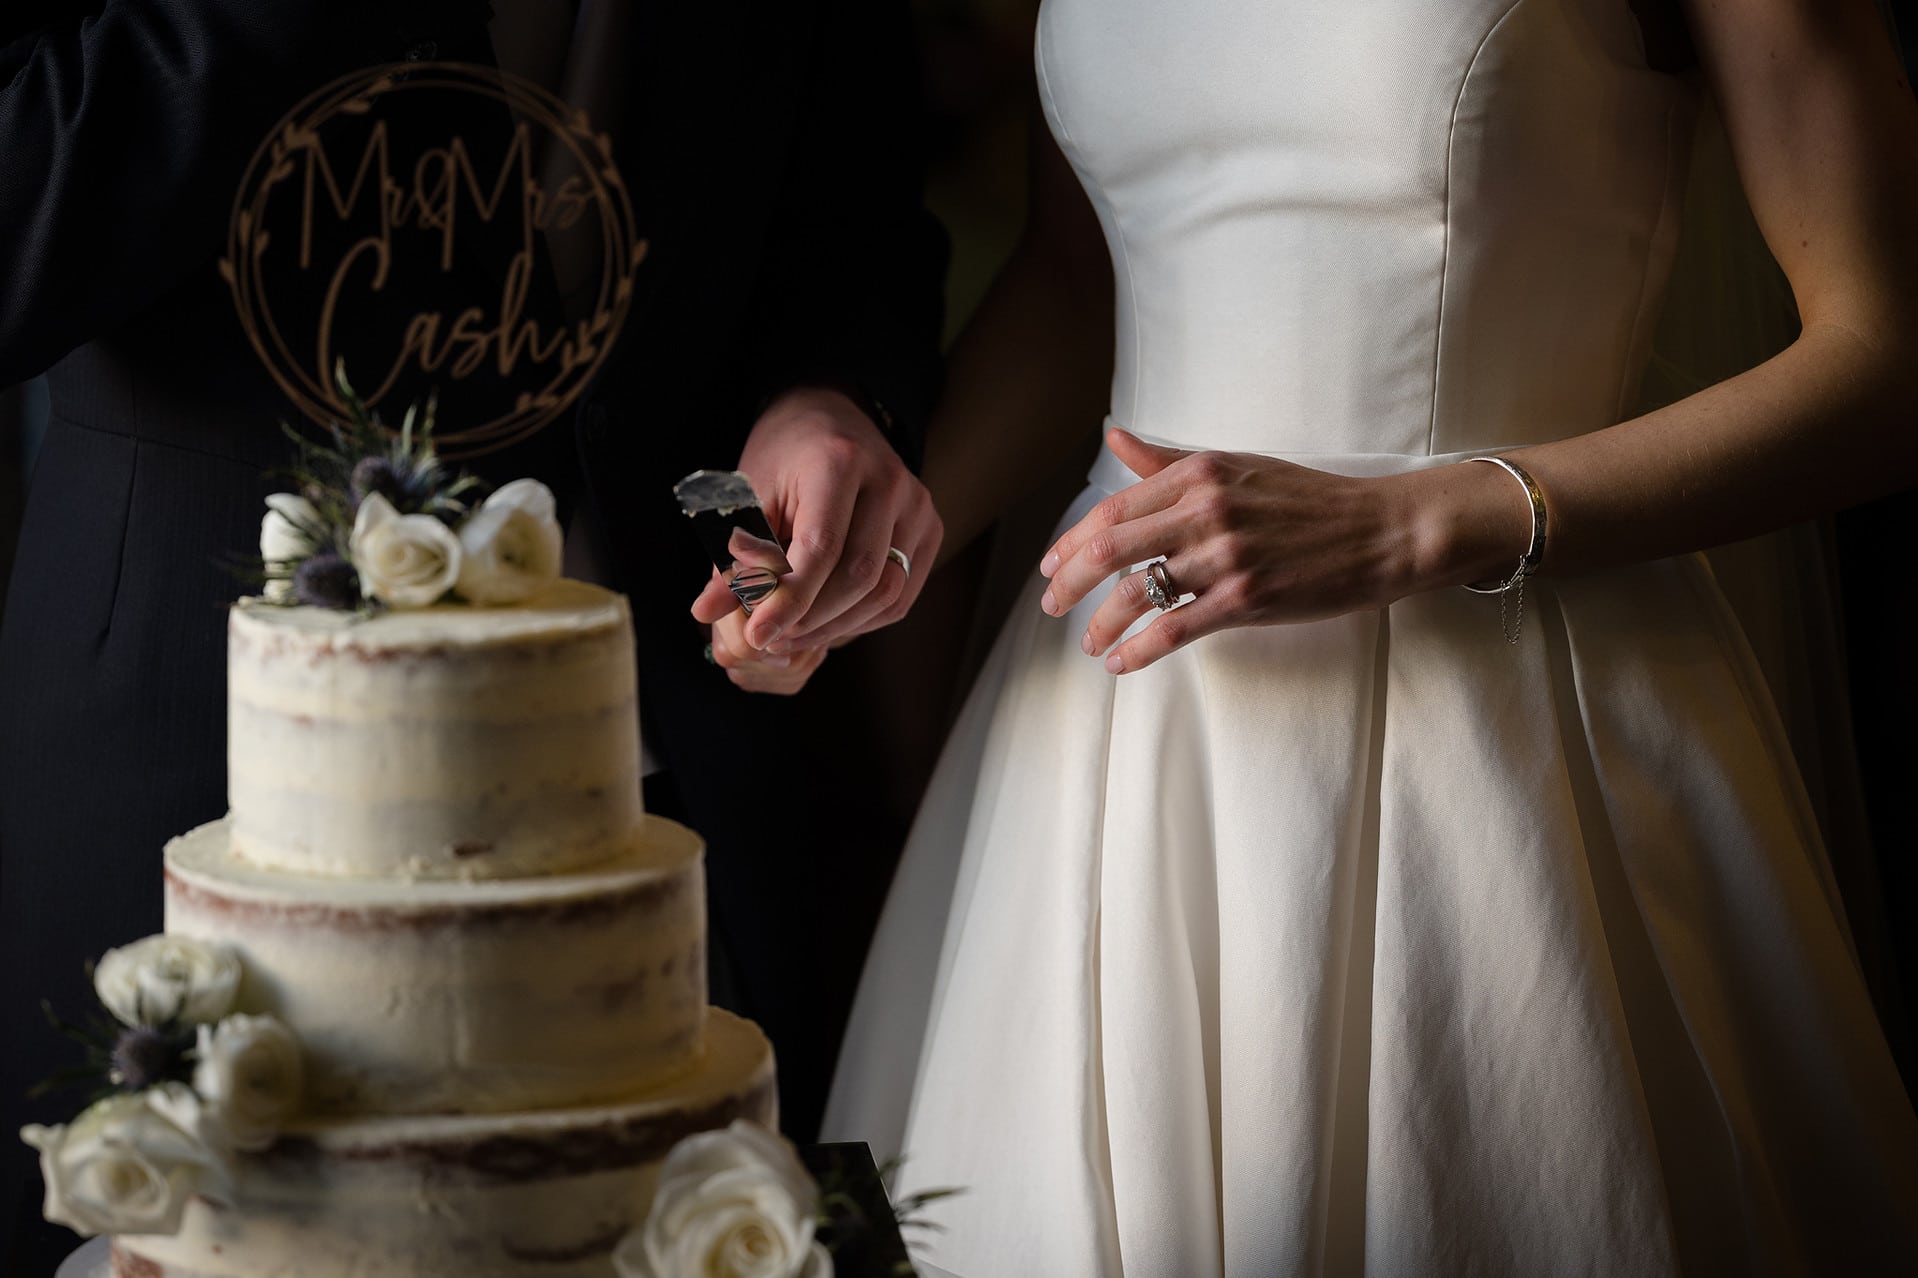 Close up of the bride and groom's hands just after cutting their wedding cake with the knife still in the groom's hand